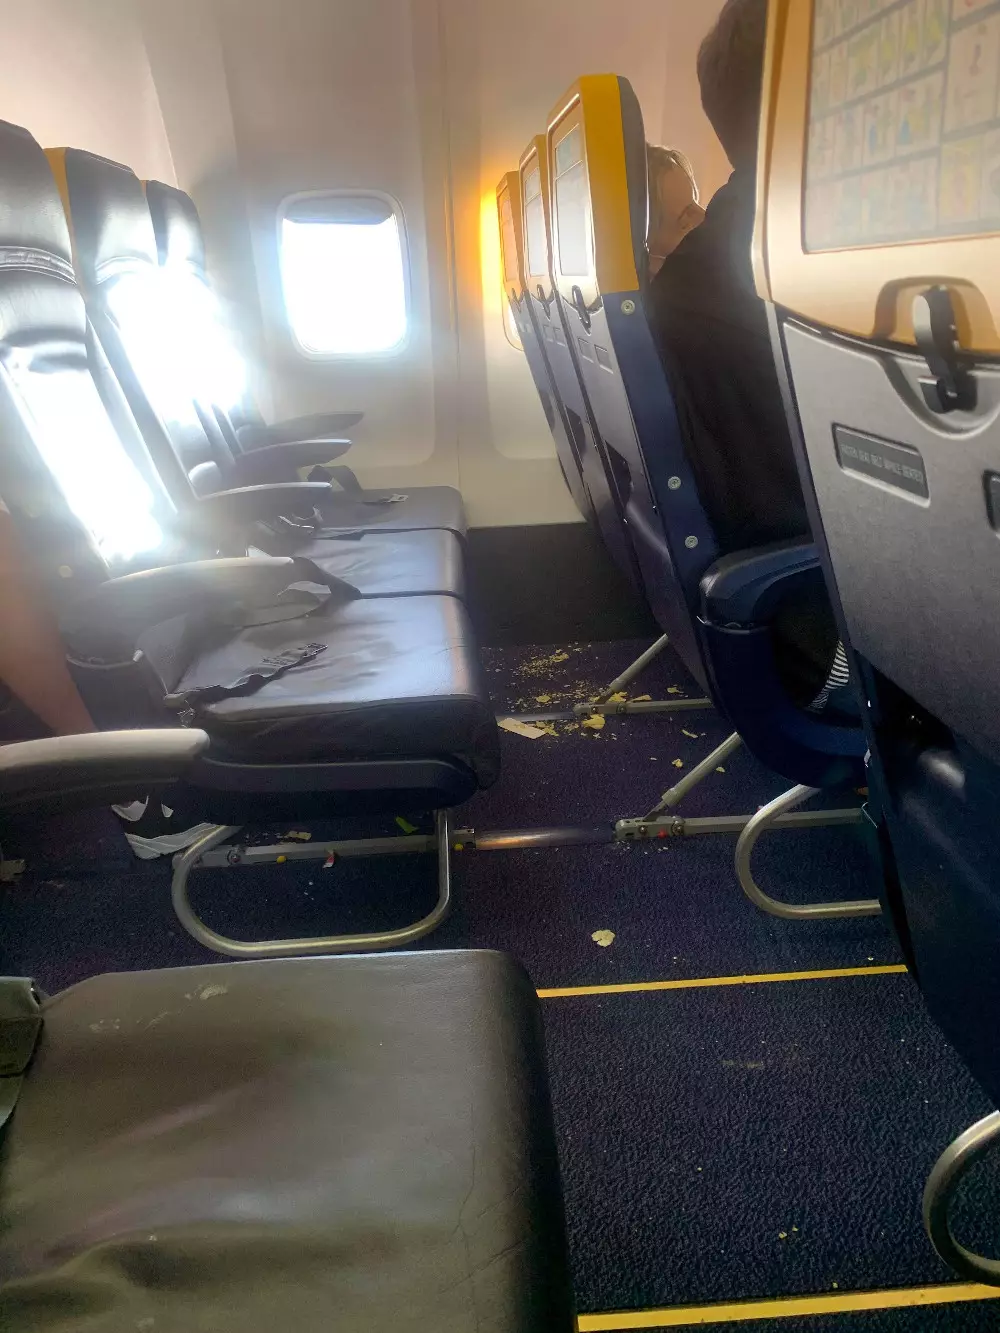 Passengers reportedly refused to sit in these seats on a recent Ryanair flight.